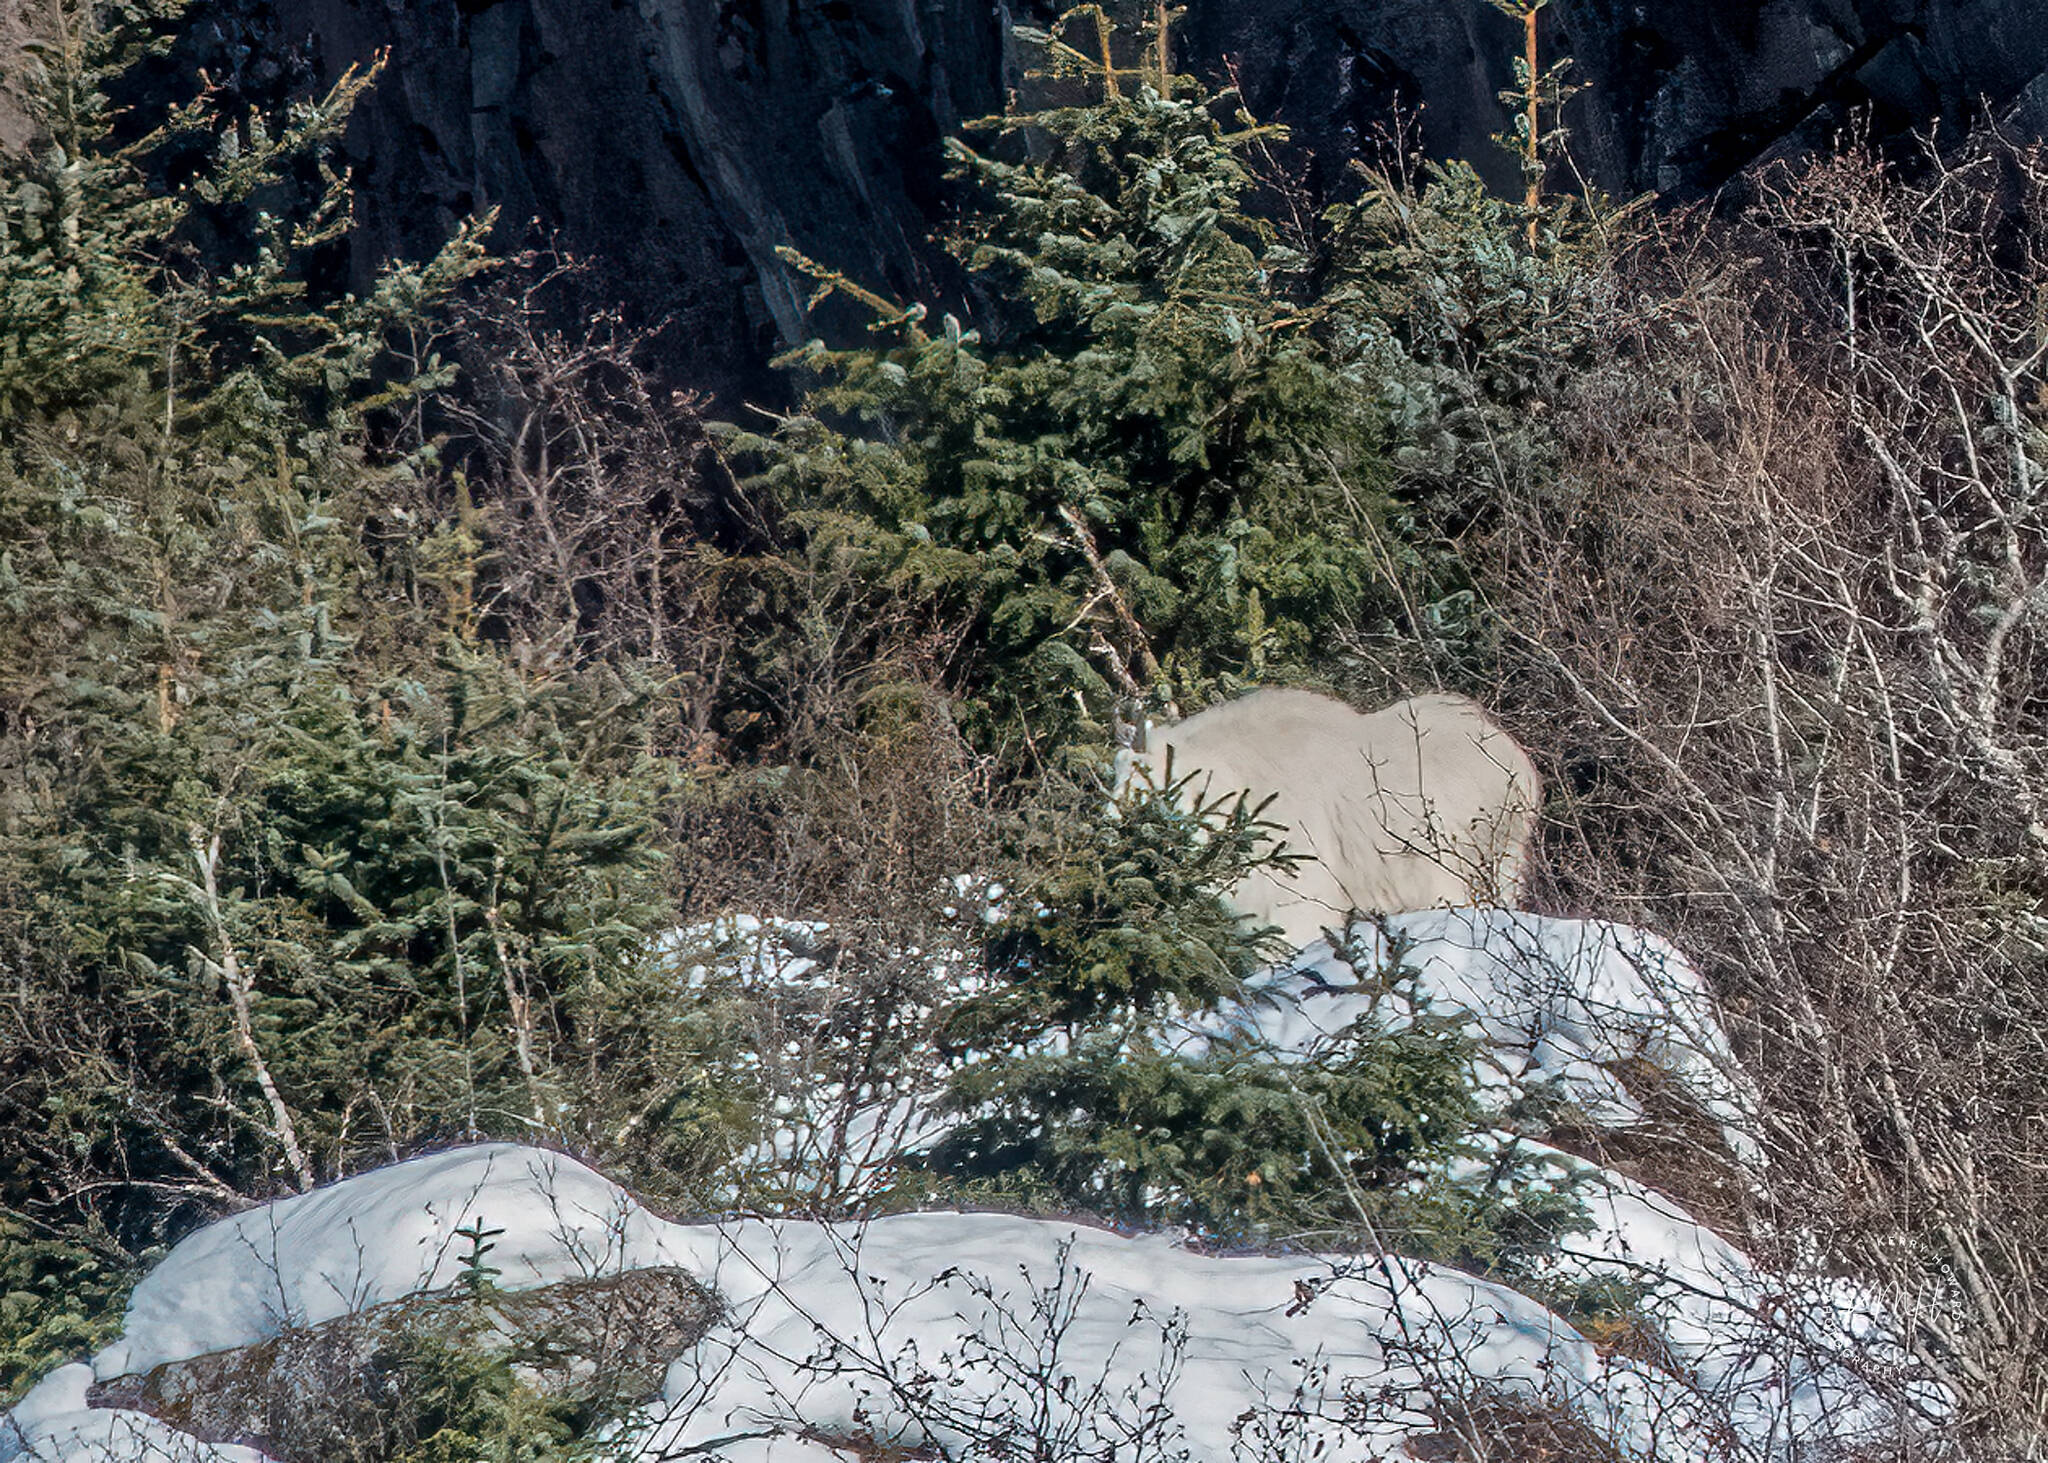 A very shaggy mountain goat stands on a rocky outcrop, partly obscured by brush (Courtesy Photo / Kerry Howard)